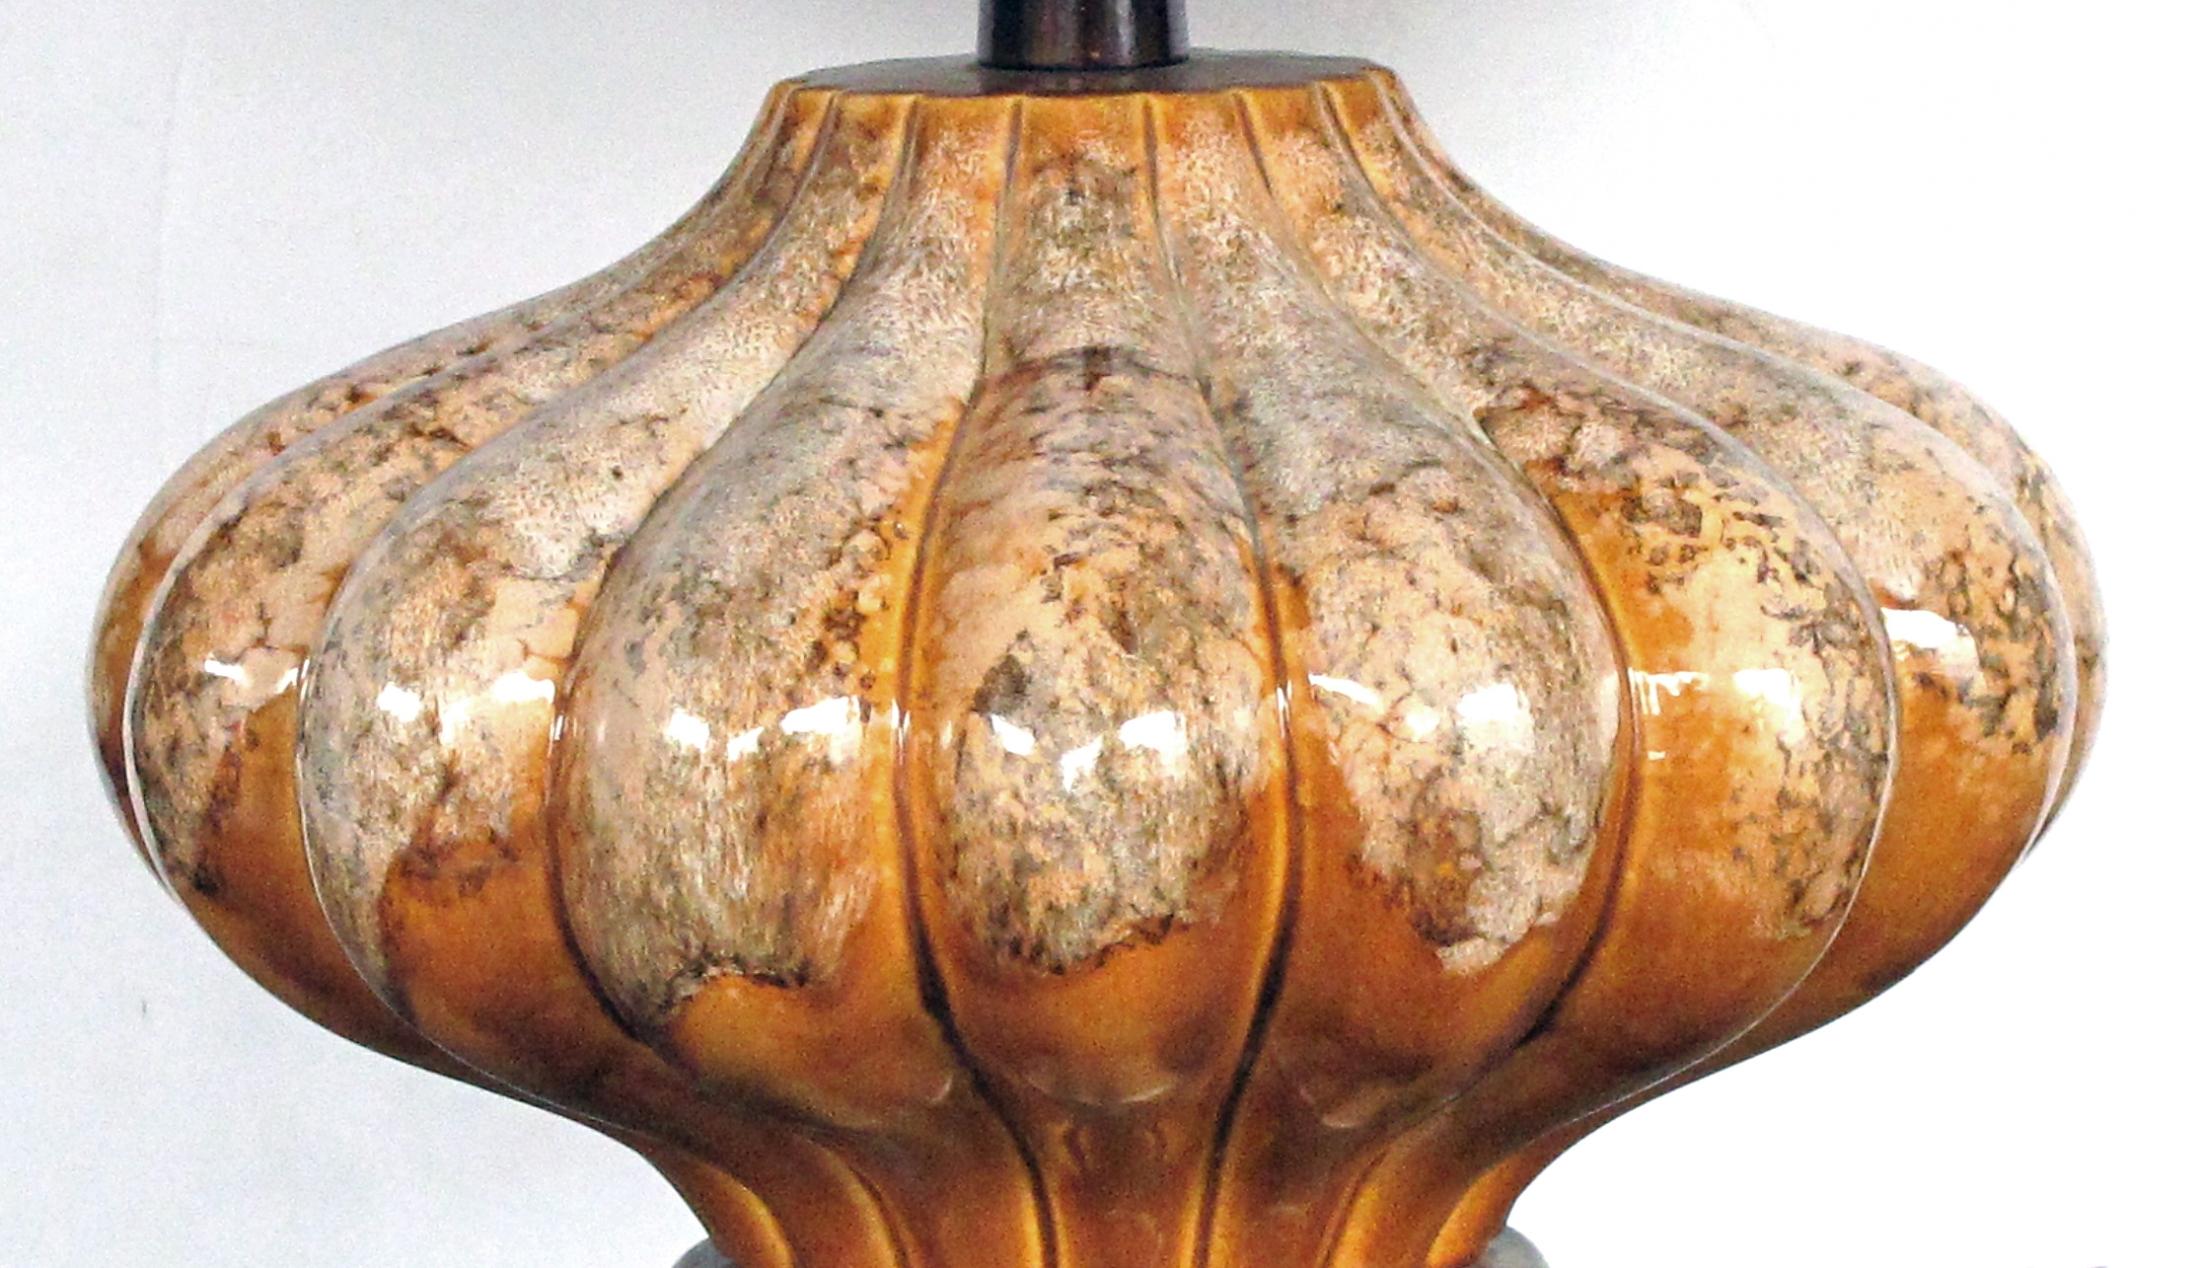 of compressed form covered overall in an ivory and brown drip-glaze over a caramel ground